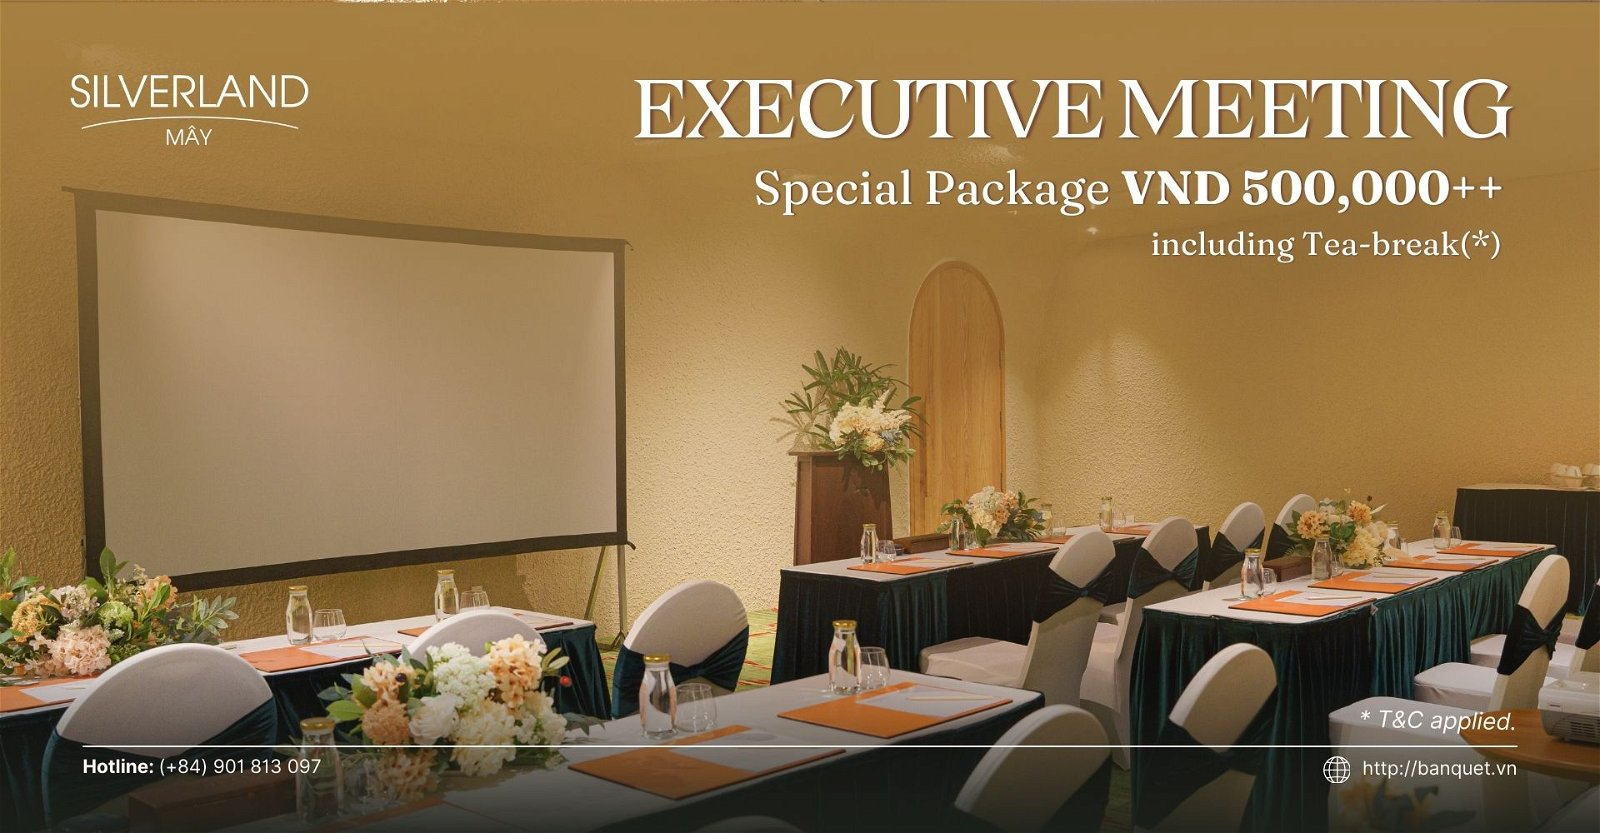 EXECUTIVE MEETING – SPECIAL PACKAGE